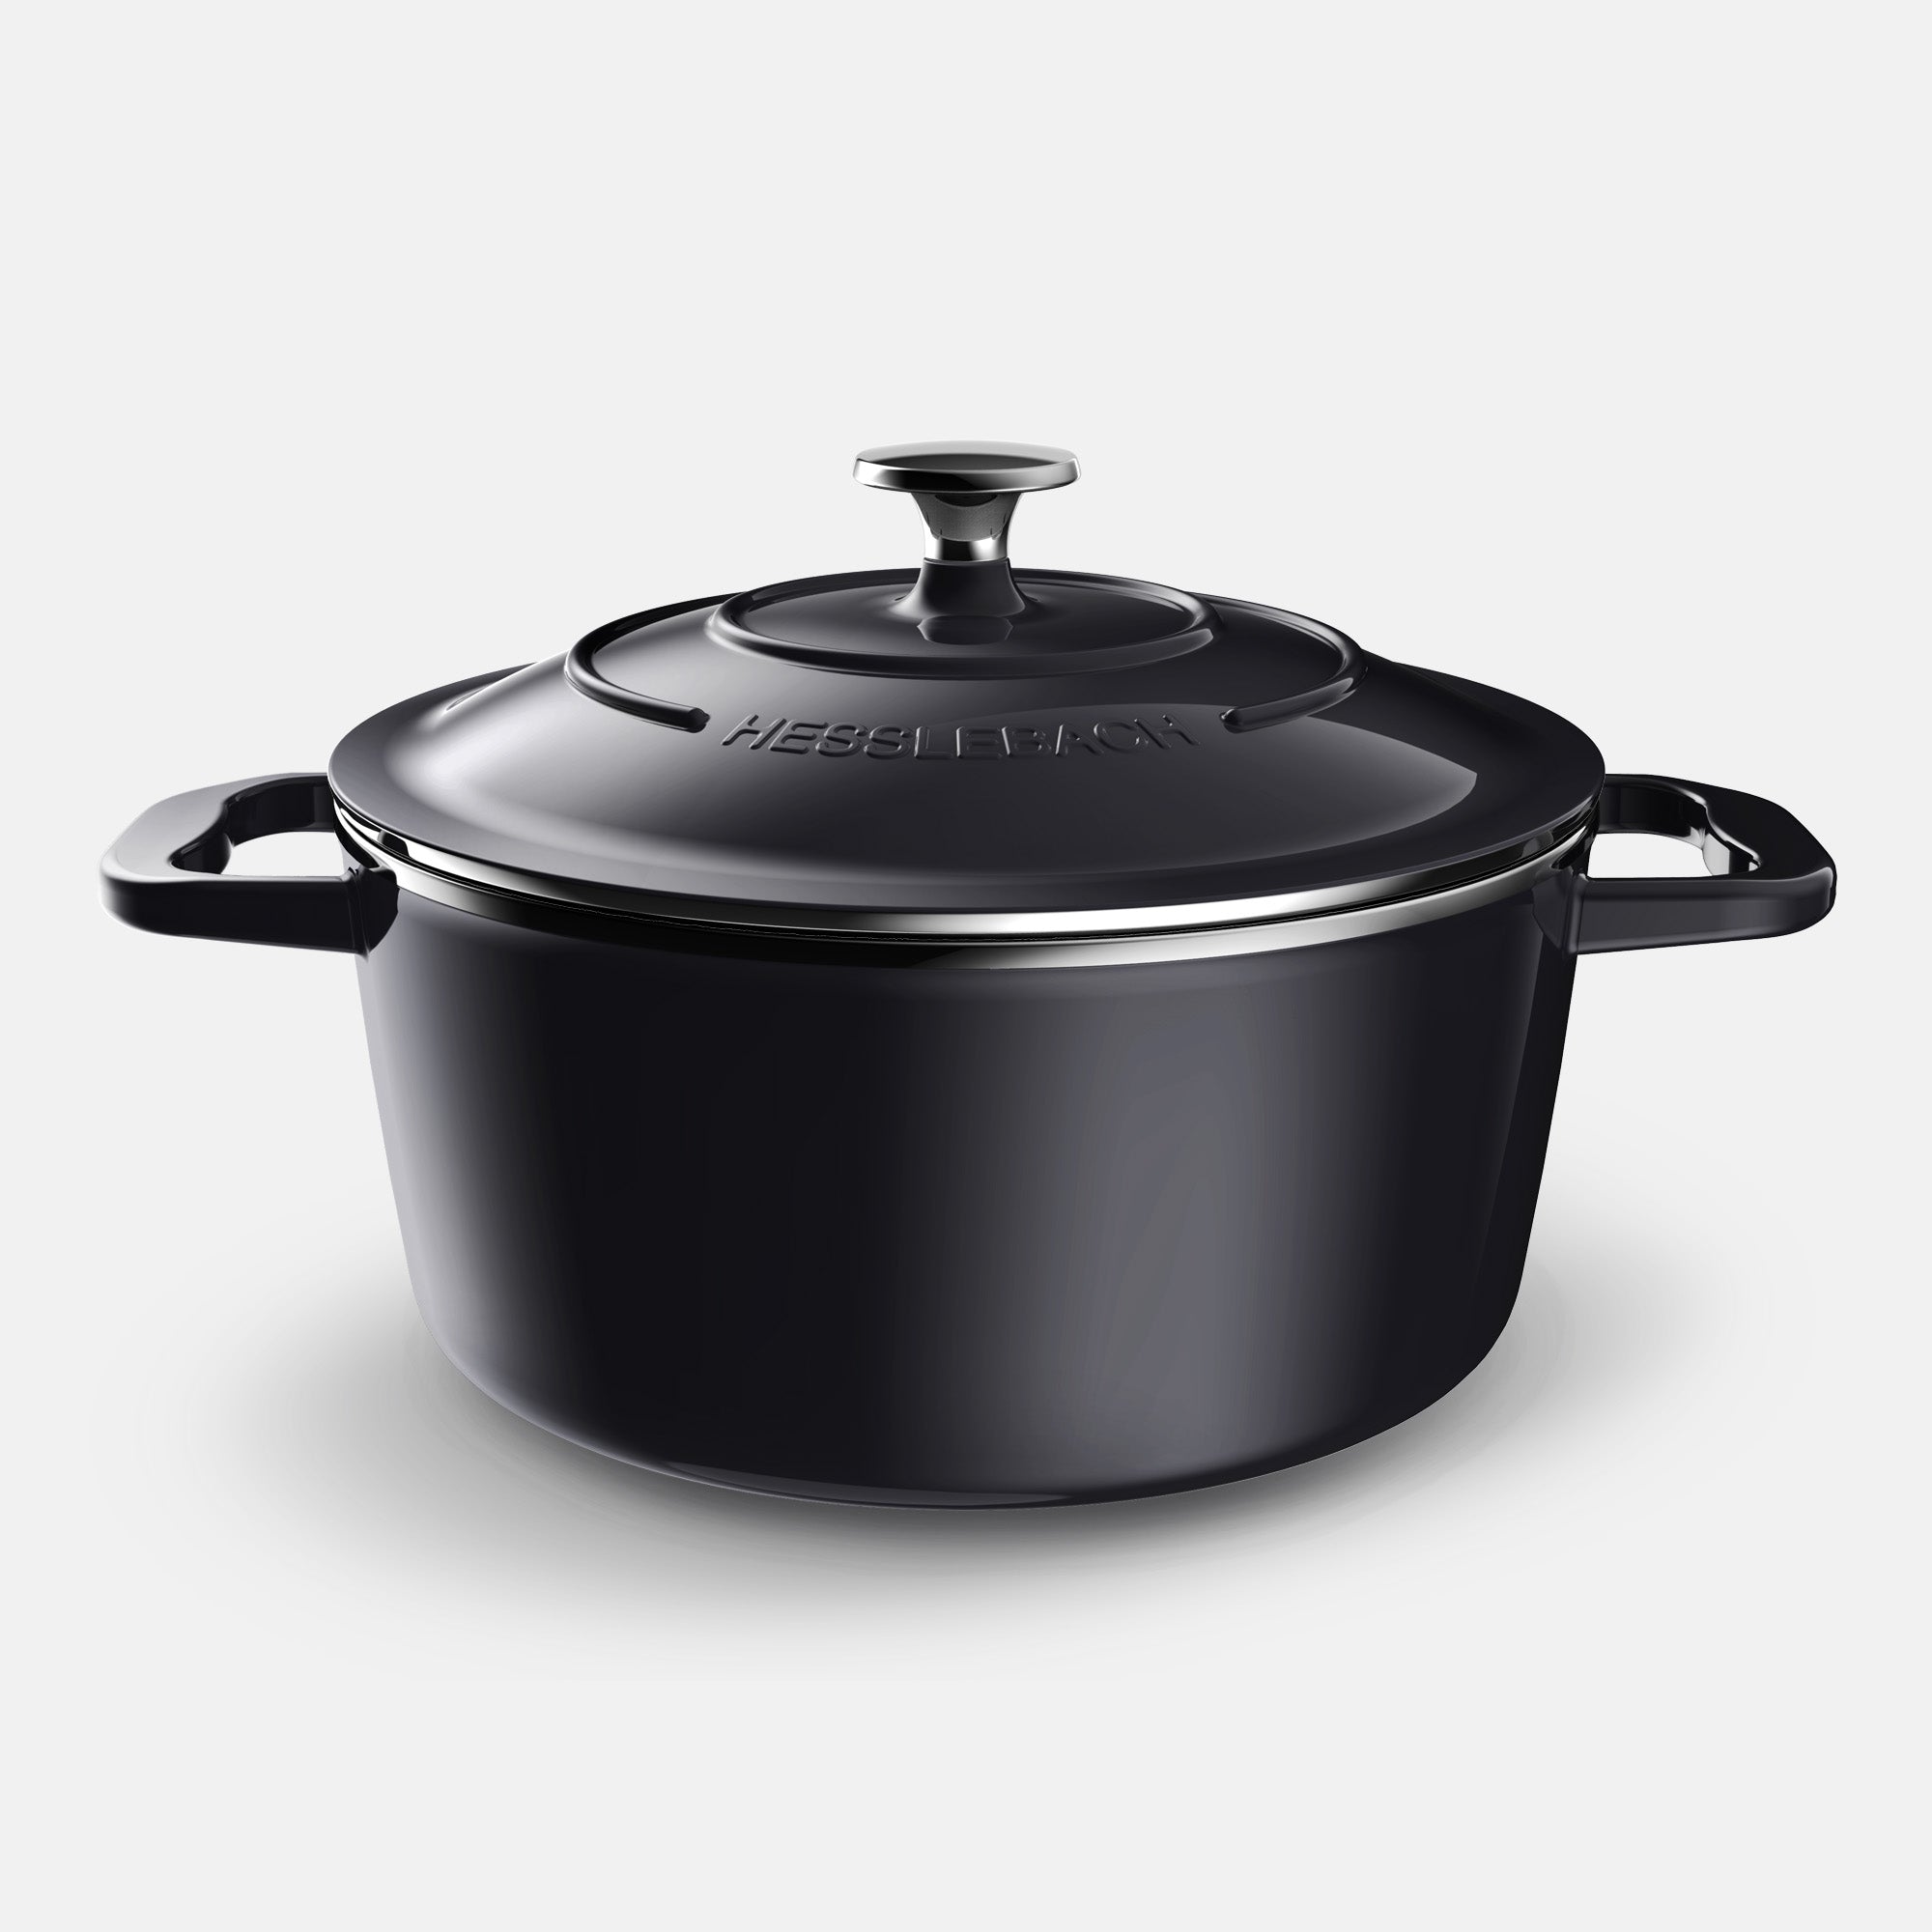 Cast Iron Cooking on Induction: A Symphony of Tradition and